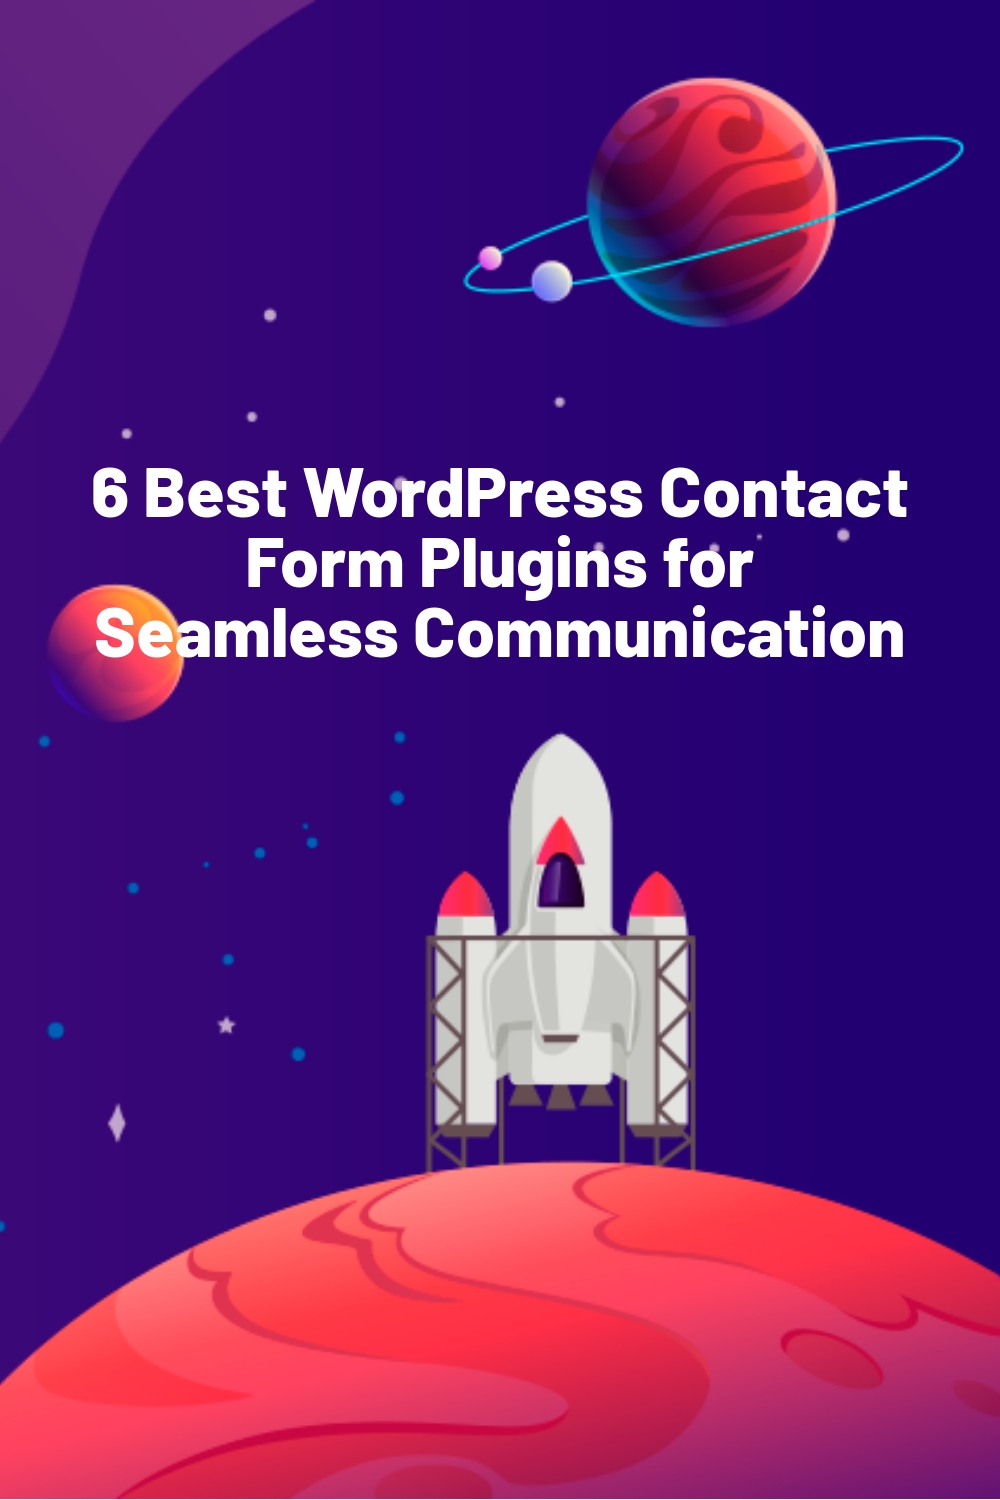 6 Best WordPress Contact Form Plugins for Seamless Communication